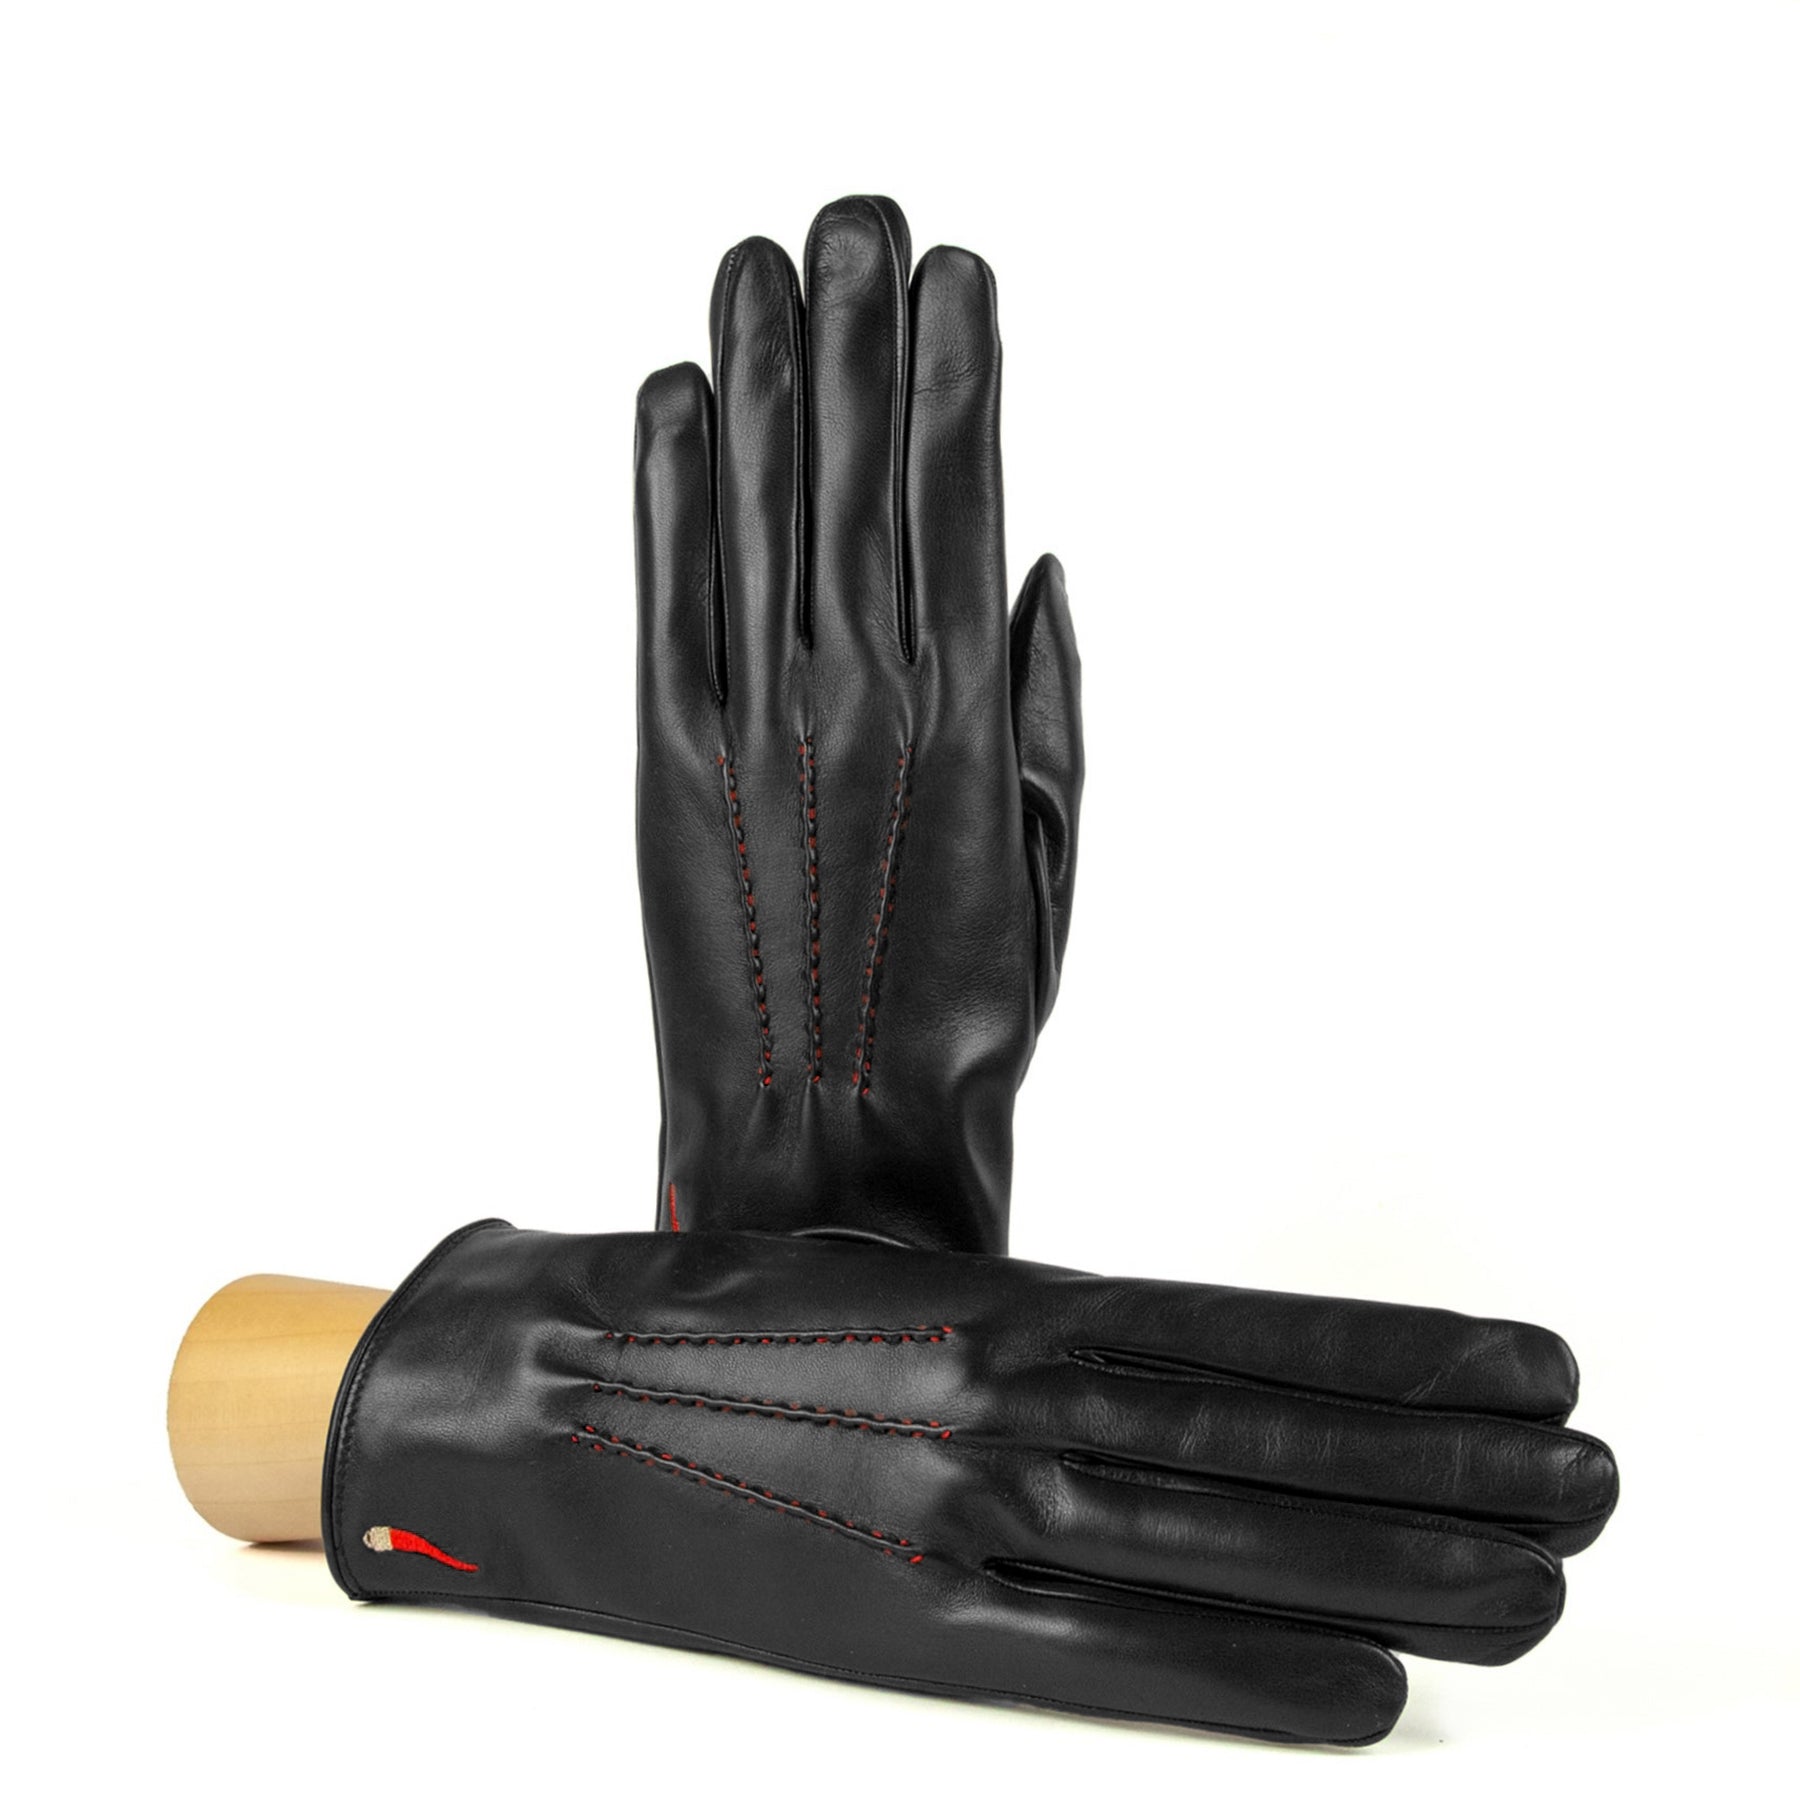 Men's black nappa leather gloves "Curniciello" with 3 red points on top and cashmere lining